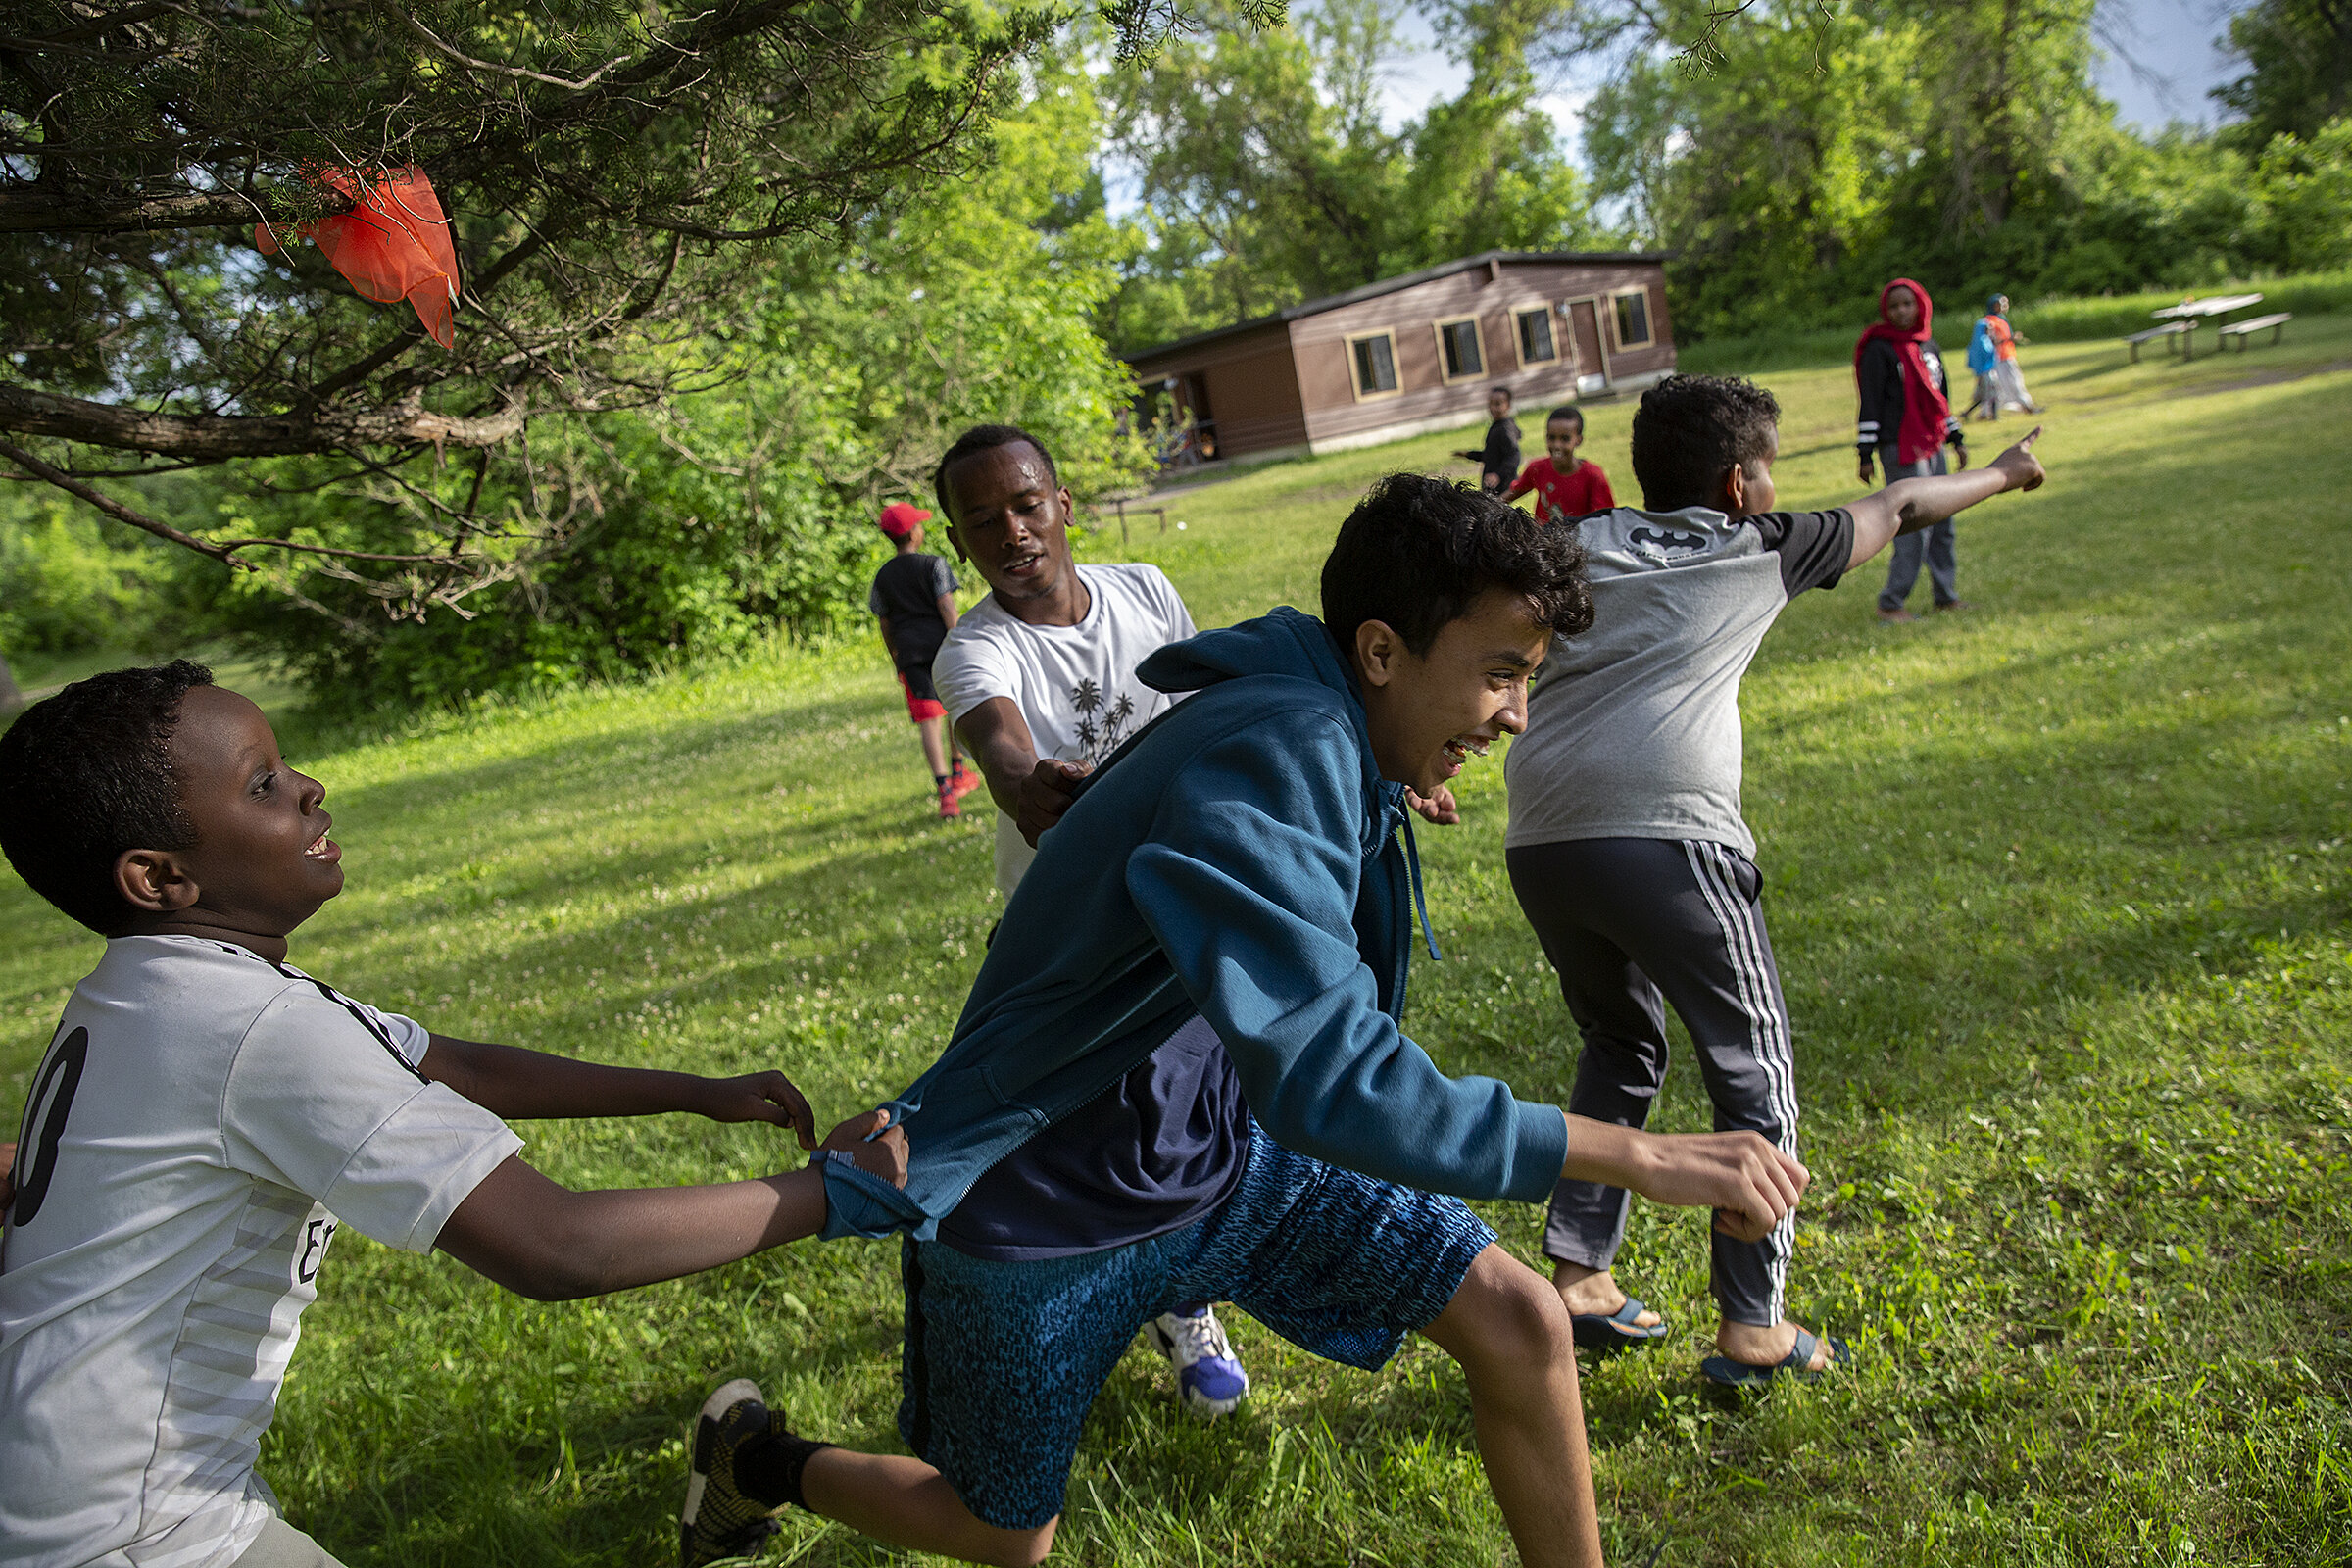  A Minnesota summer camp is helping connect city kids and children of refugees to the state's outdoor summer culture, often for the first time. Khalid Musse (left) and  Abubakar Sherif (center) grab Bukhari Booker during a game of capture the flag at